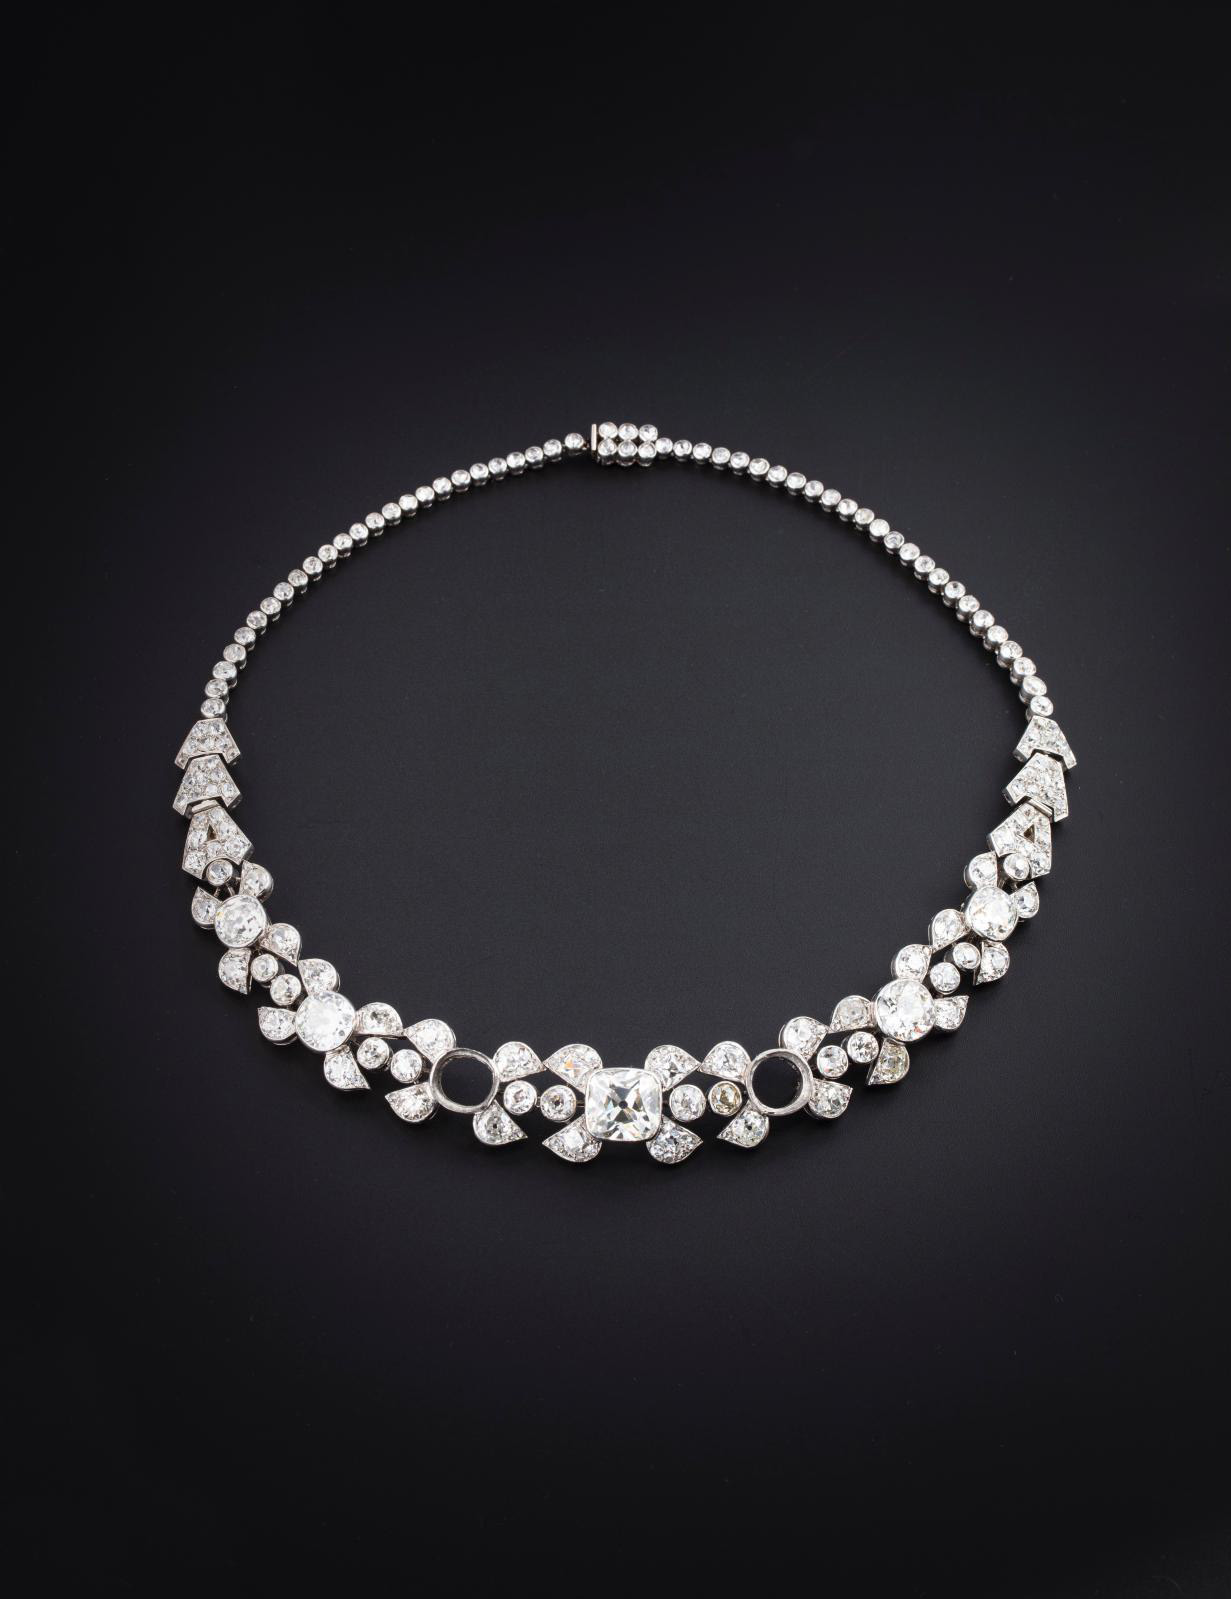 Exquisite Transformations of a Chaumet Necklace